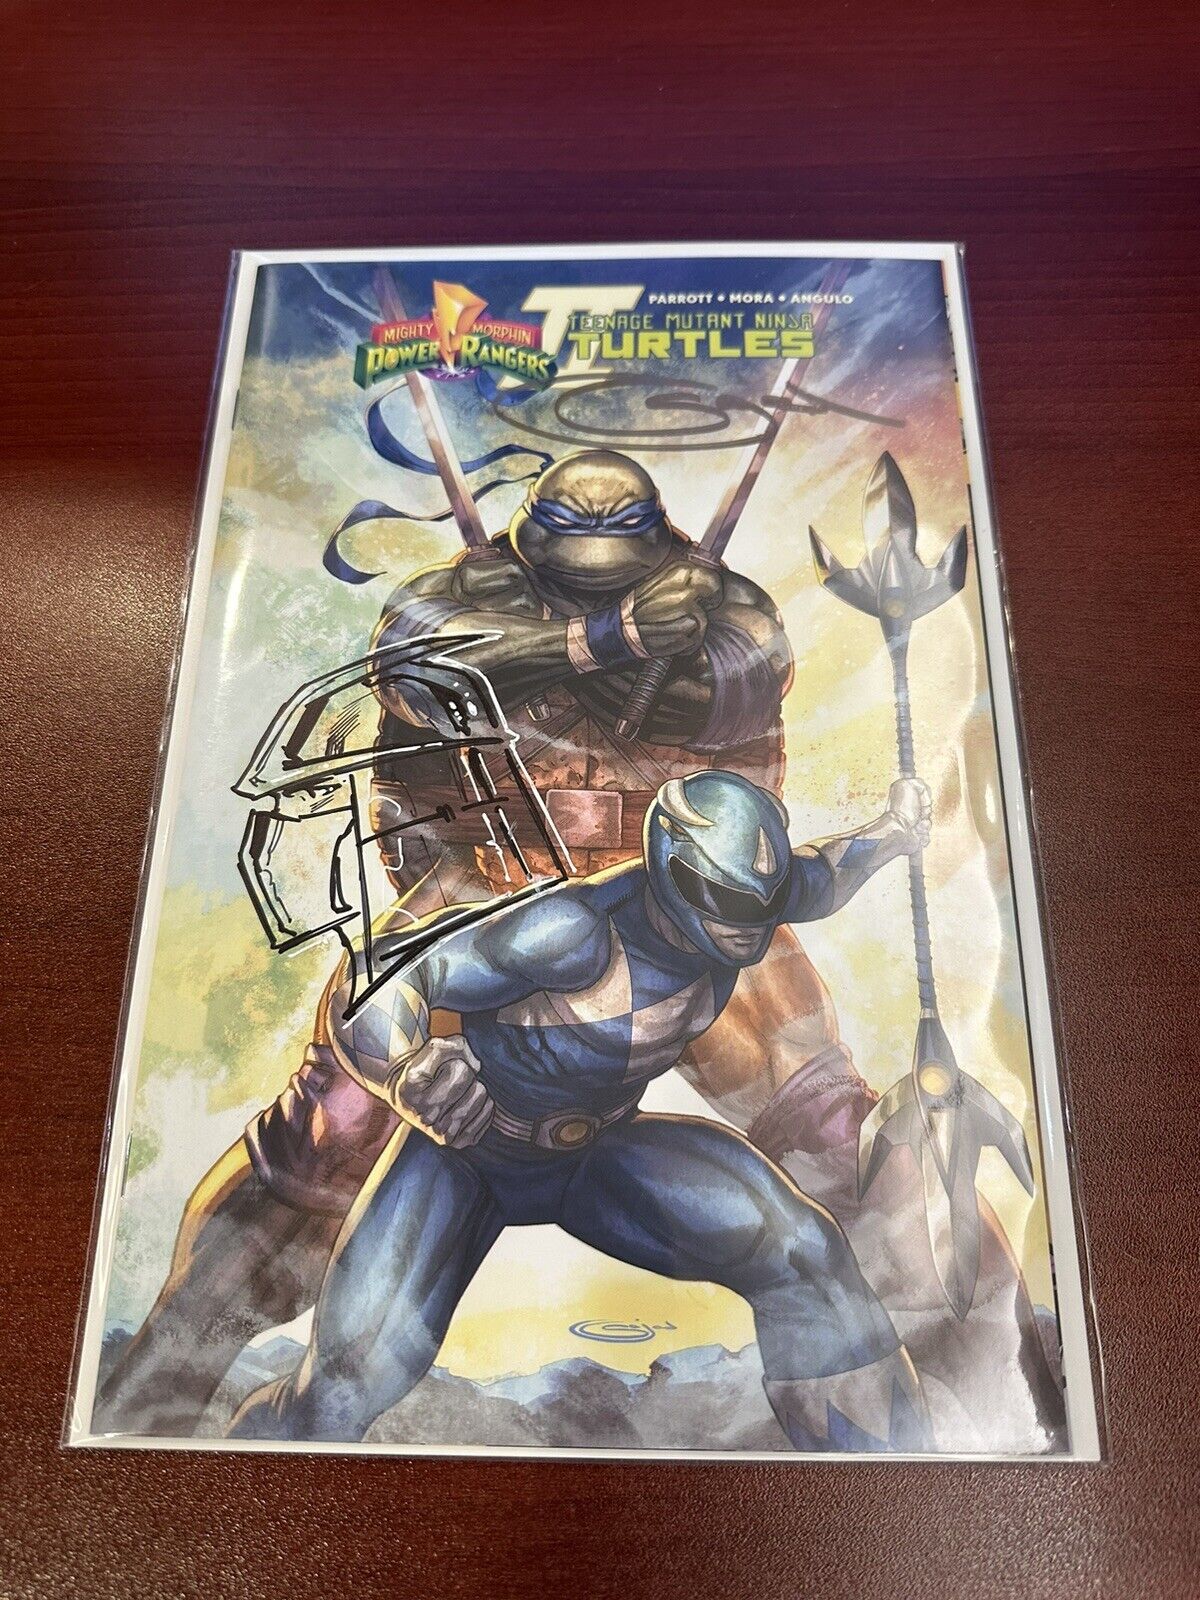 TMNT Power Rangers Comic Remarque Signed Sajad Shah #3 with COA